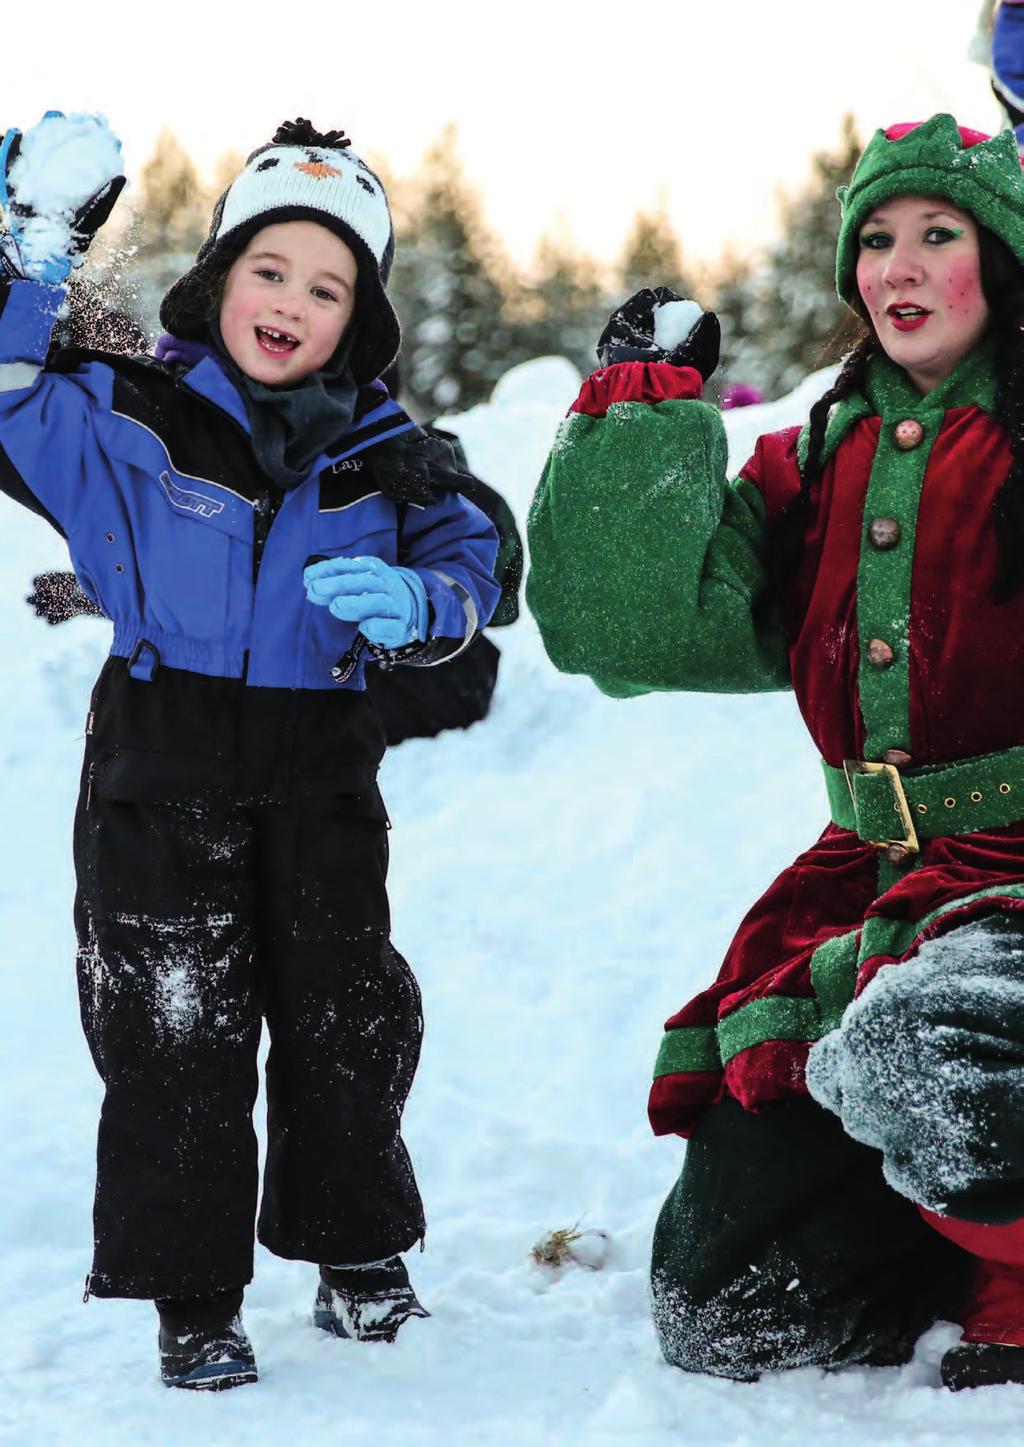 For more information please visit To book call 01923 822388 Welcome to the REAL Lapland Santa Claus For over 40 years Canterbury Travel has been creating family holidays of distinction.